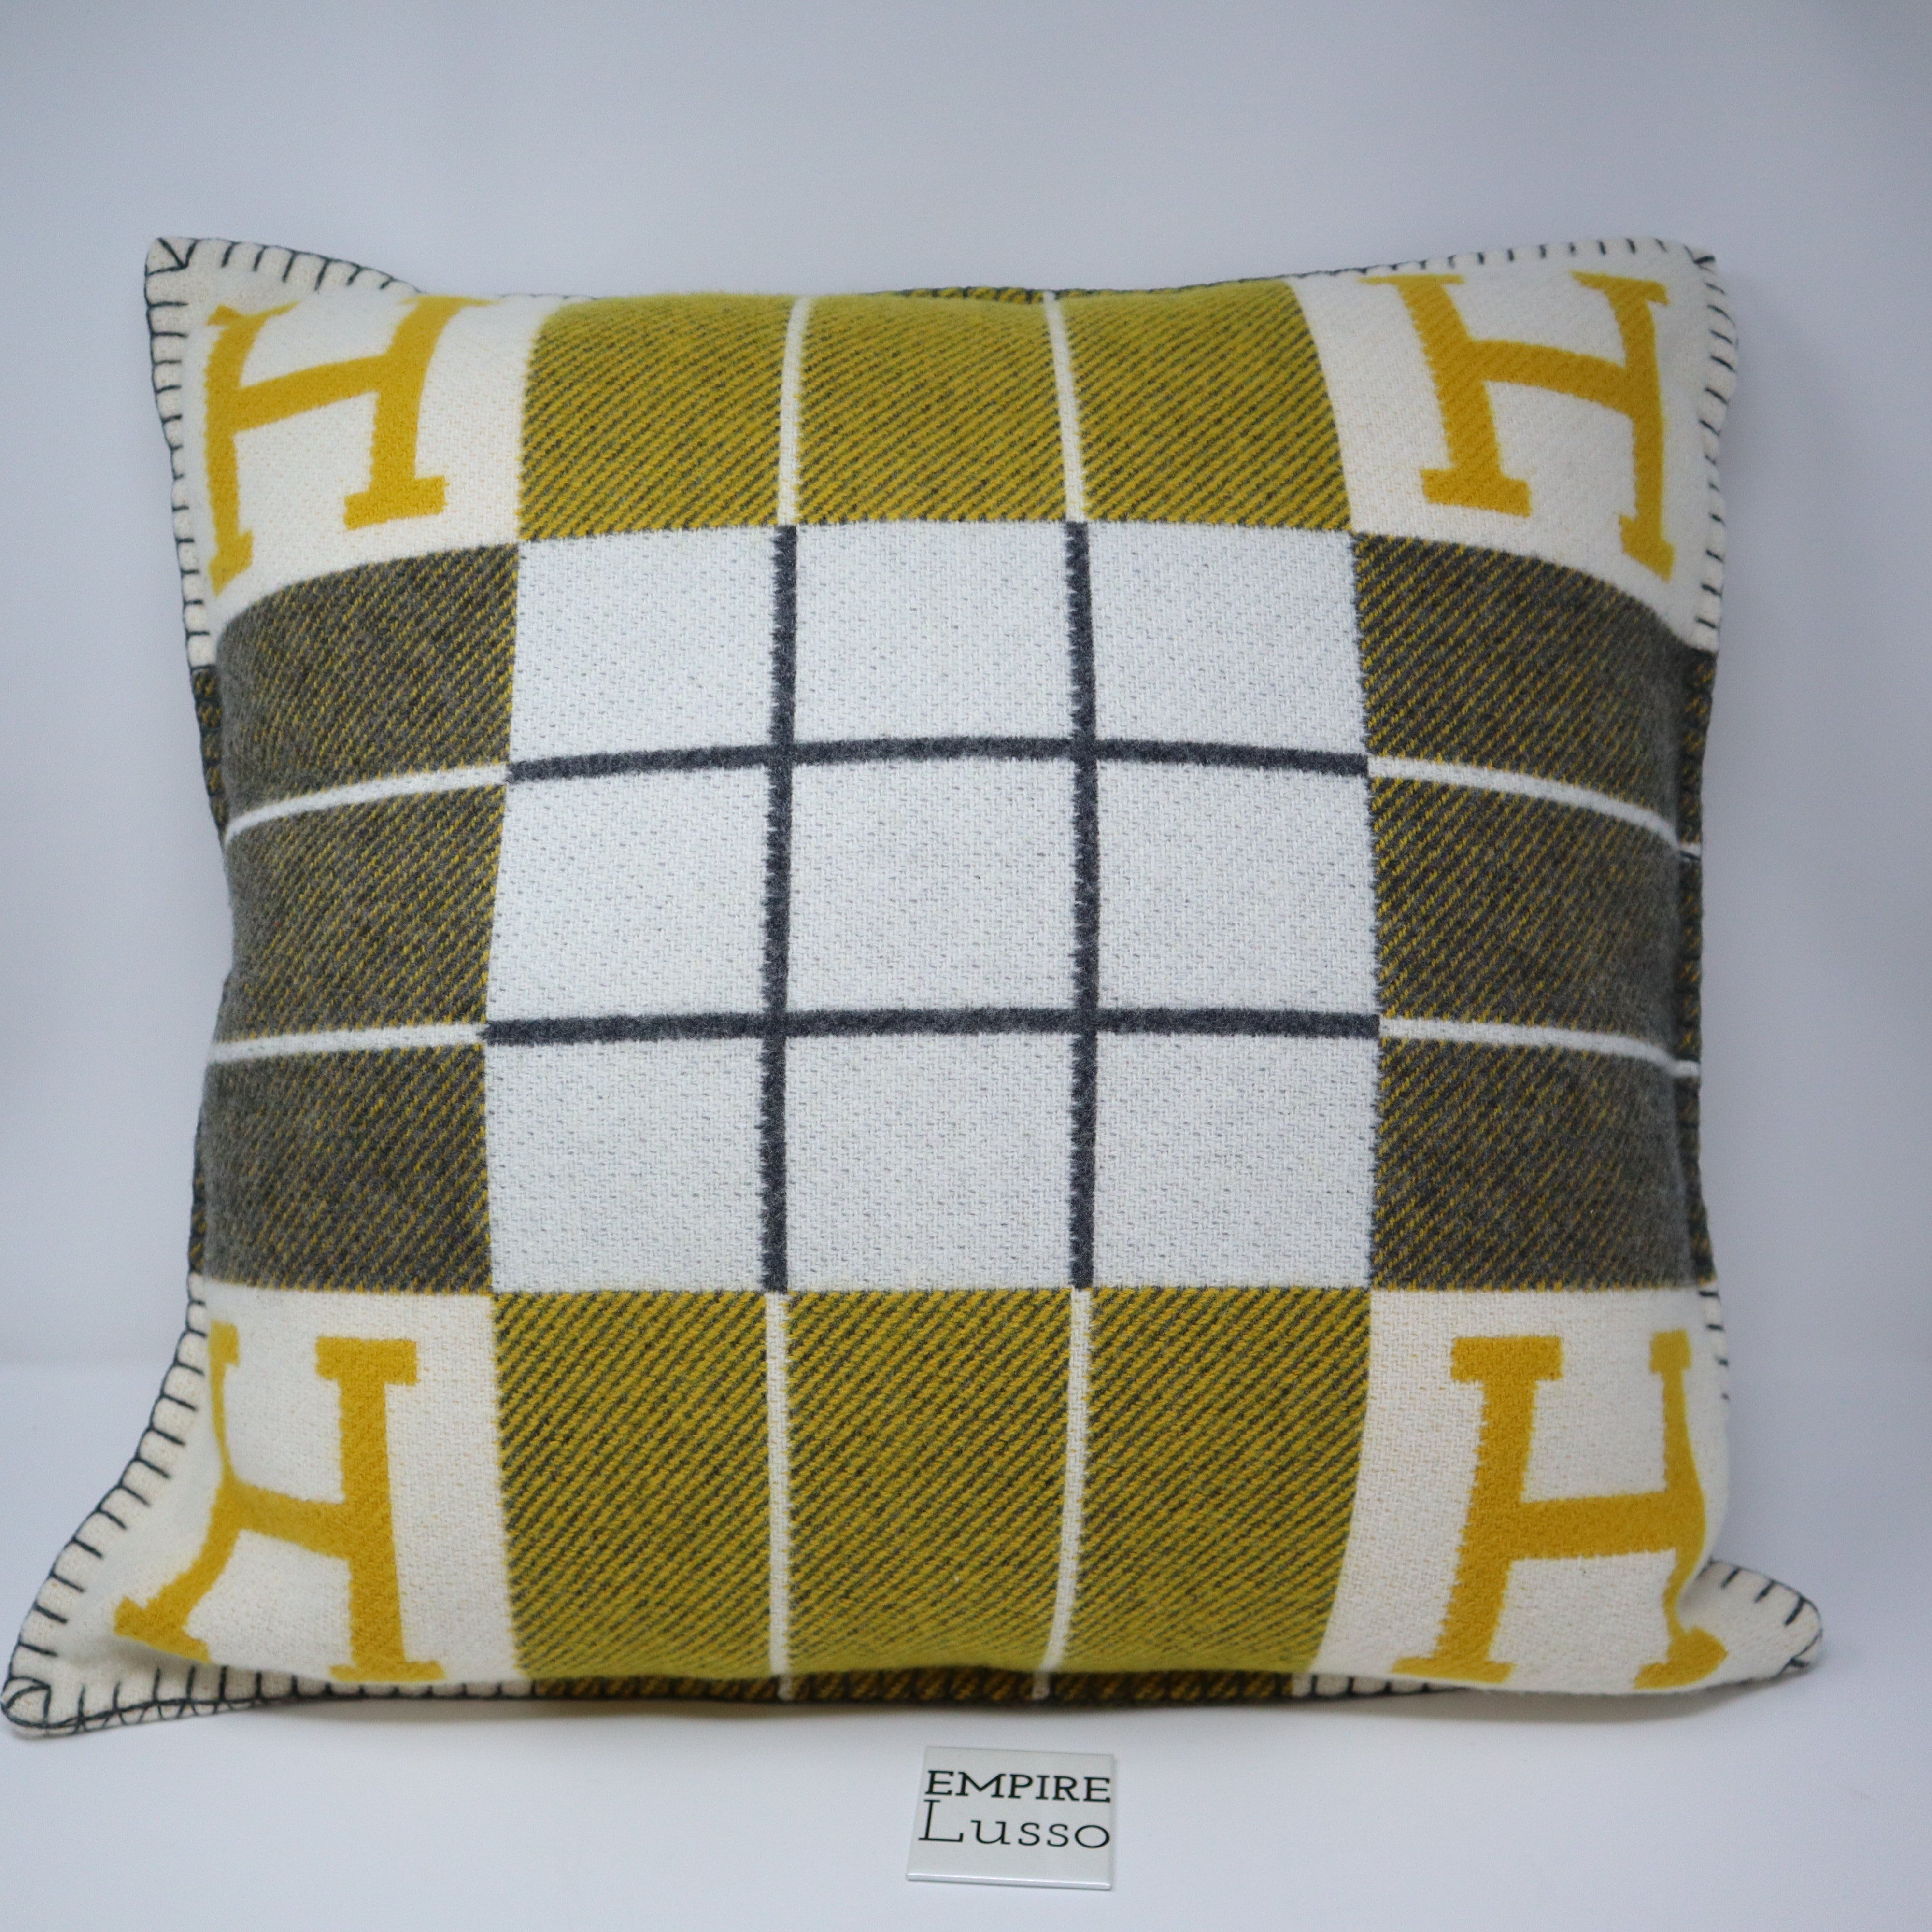 NEW HERMES Wool Cashmere Avalon III Pillow PM Gris Soleil YELLOW